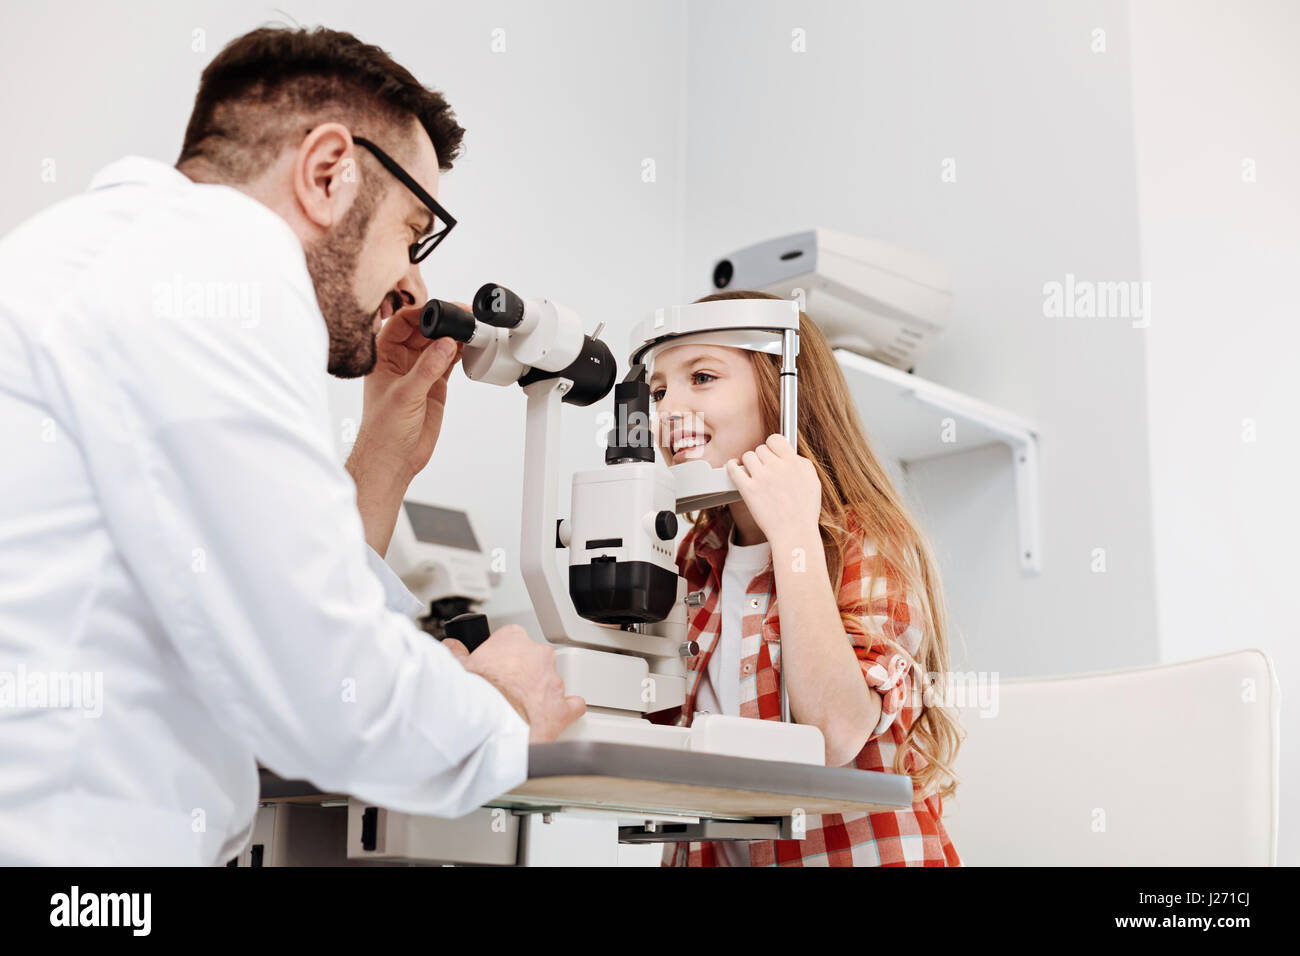 Dedicated ophthalmologist applying special equipment for diagnostics Stock Photo